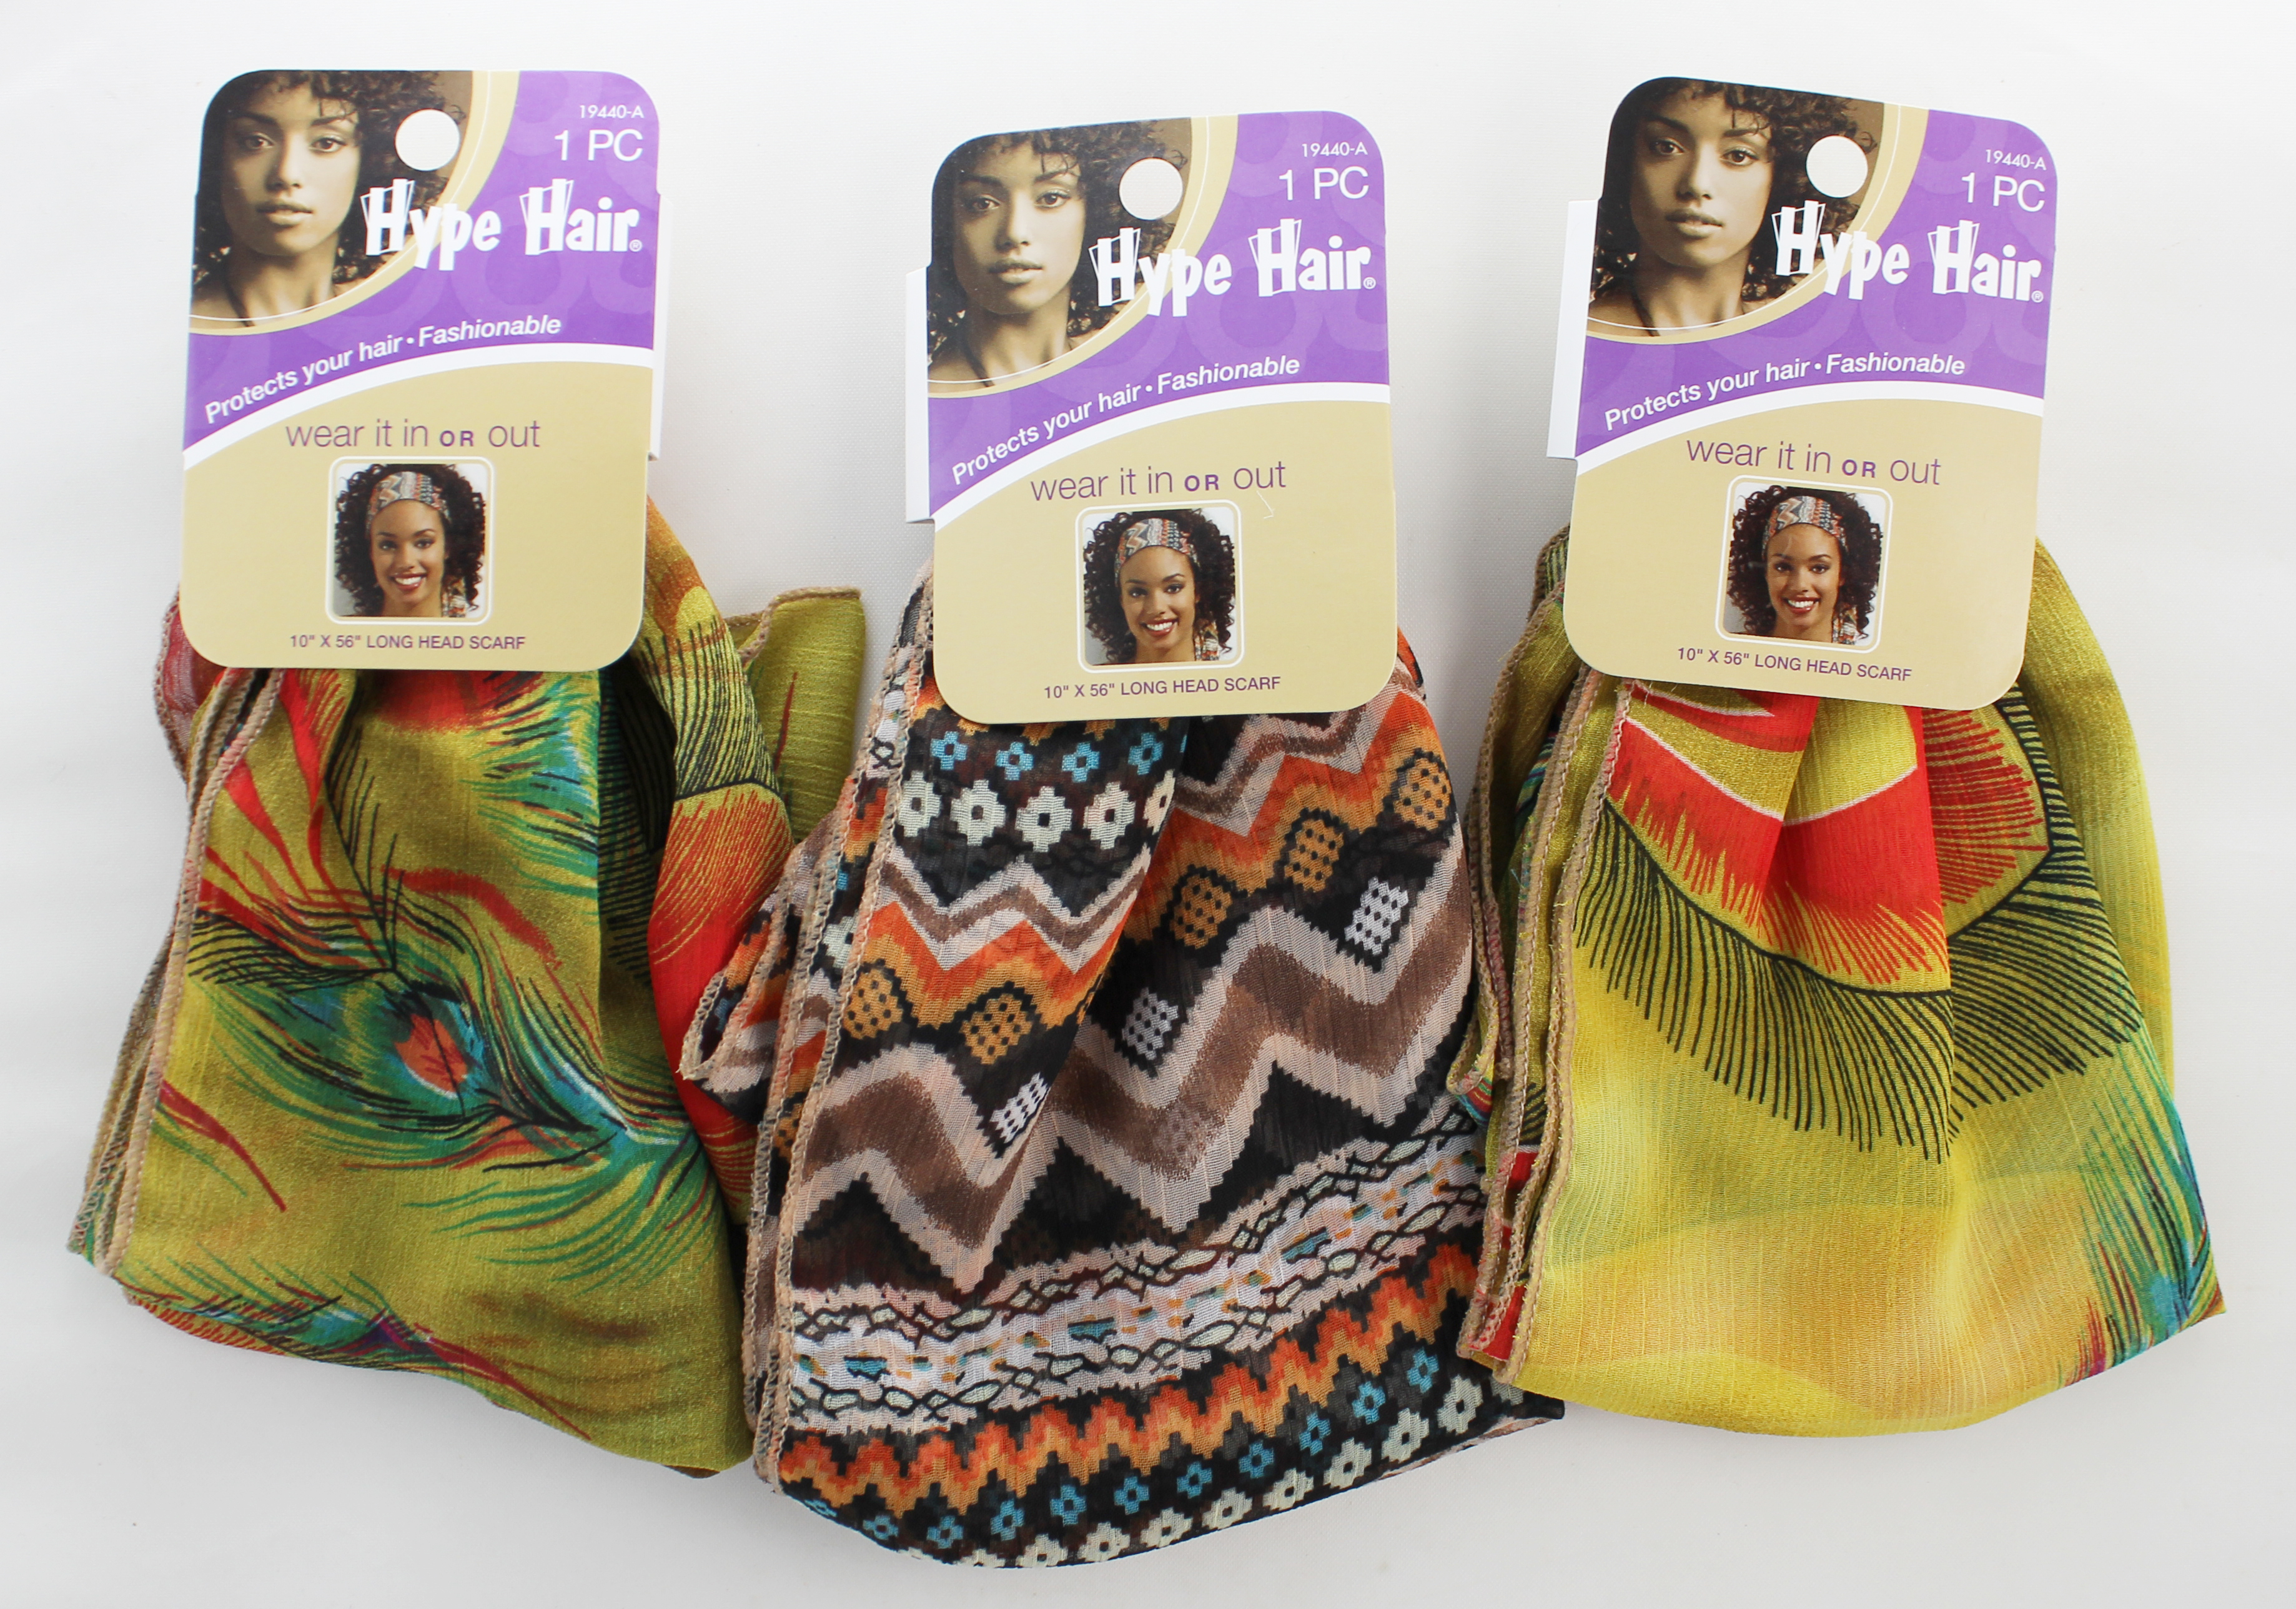 Conair Hype Hair Long Head Scarf 10" X 56" (Sold in Pack of 3) - Click Image to Close